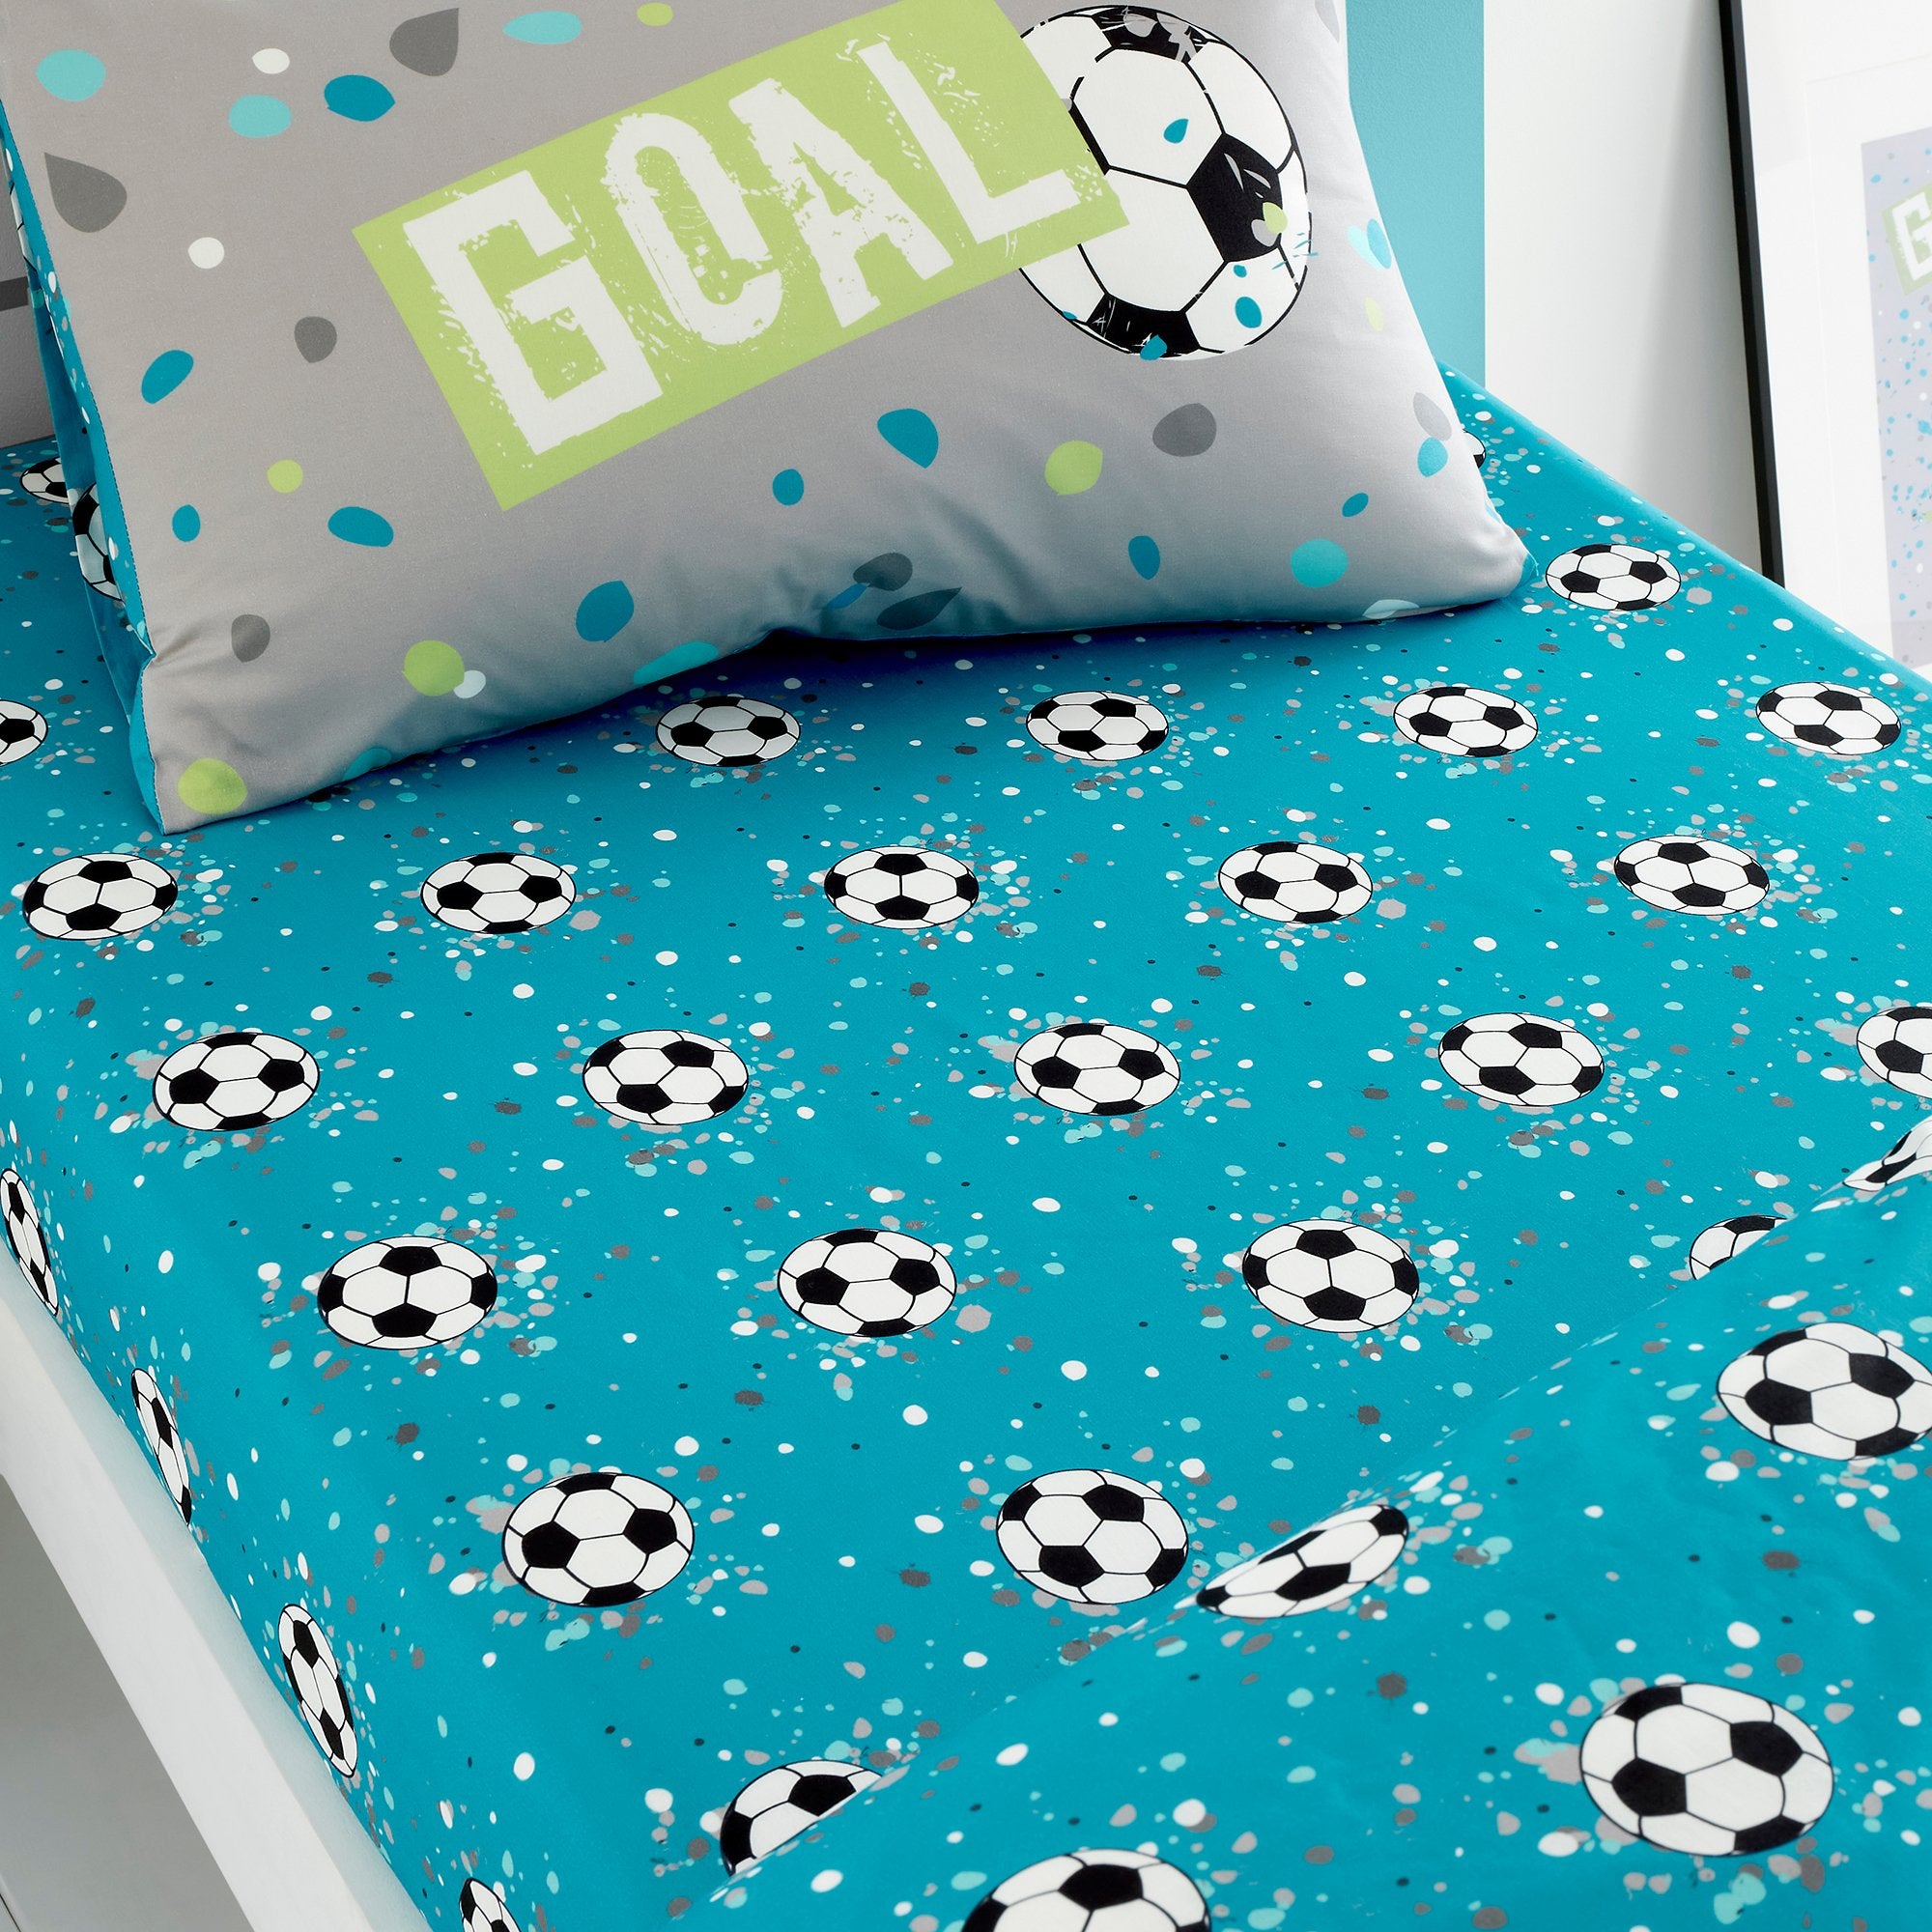 25cm Fitted Bed Sheet Goal by Bedlam in Grey